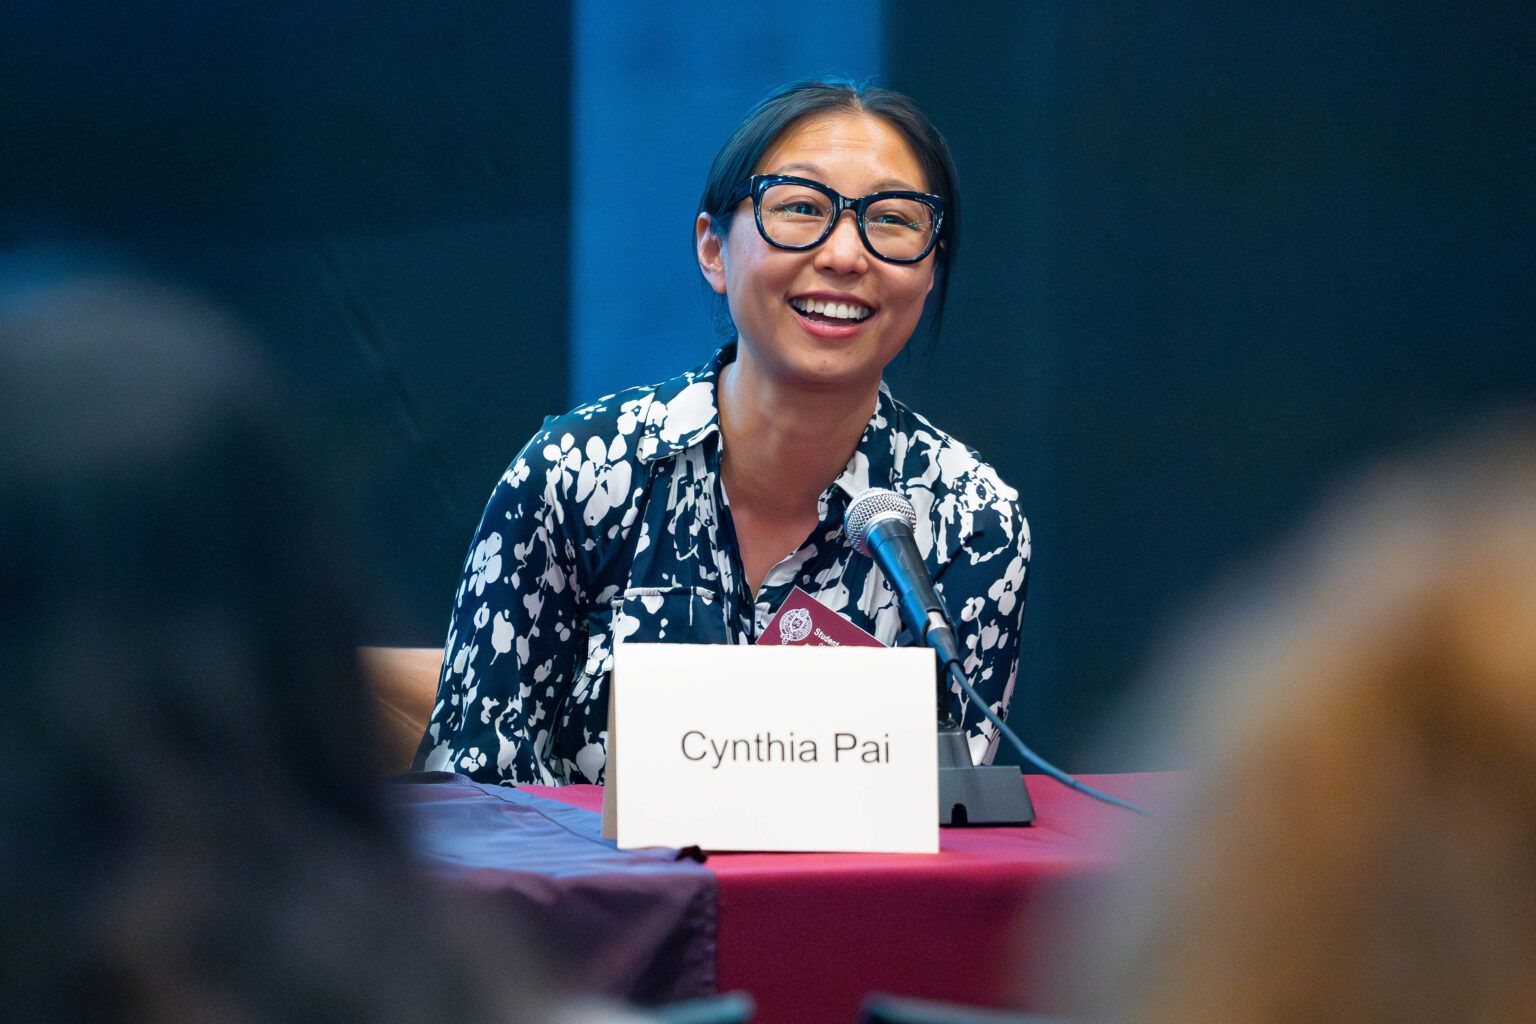 gss student Cynthia Pai speaks on a panel at Fordham's Accepted MSW Student Day